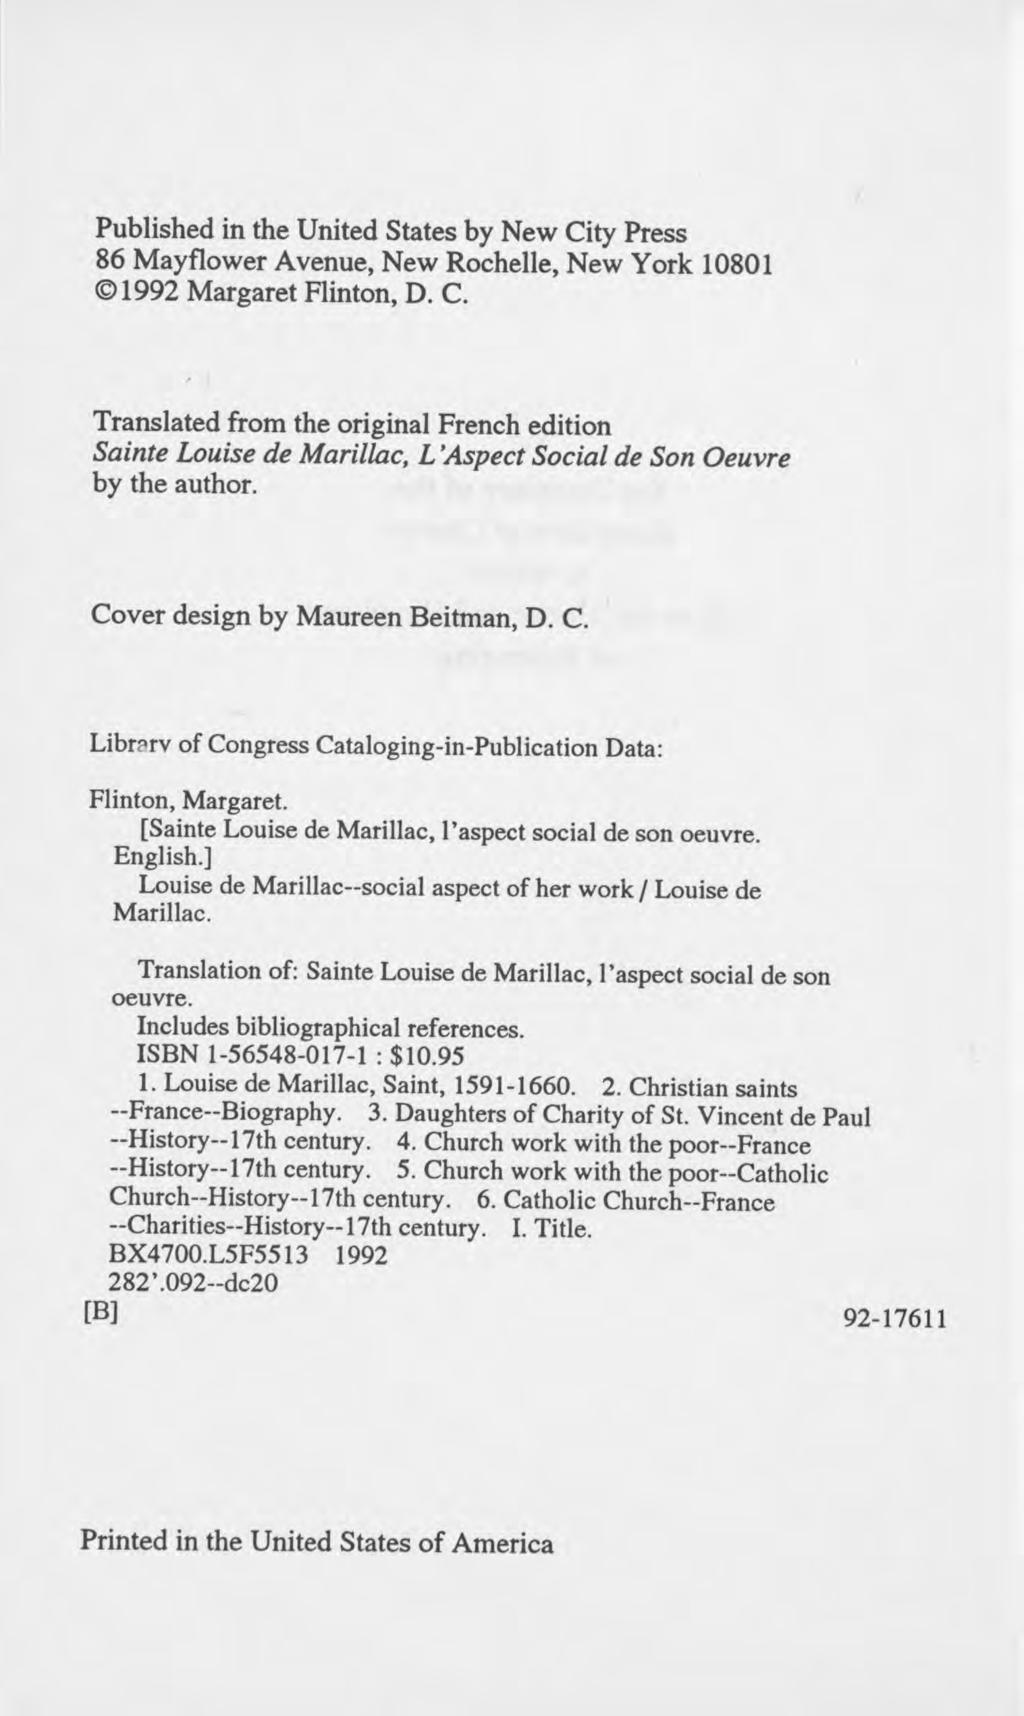 Published in the United States by New City Press 86 Mayflower Avenue, New Rochelle, New York 10801 1992 Margaret Flinton, D. C. Translated from the original French edition Sainte Louise de Marillac, L 'Aspect Social de Son Oeuvre by the author.